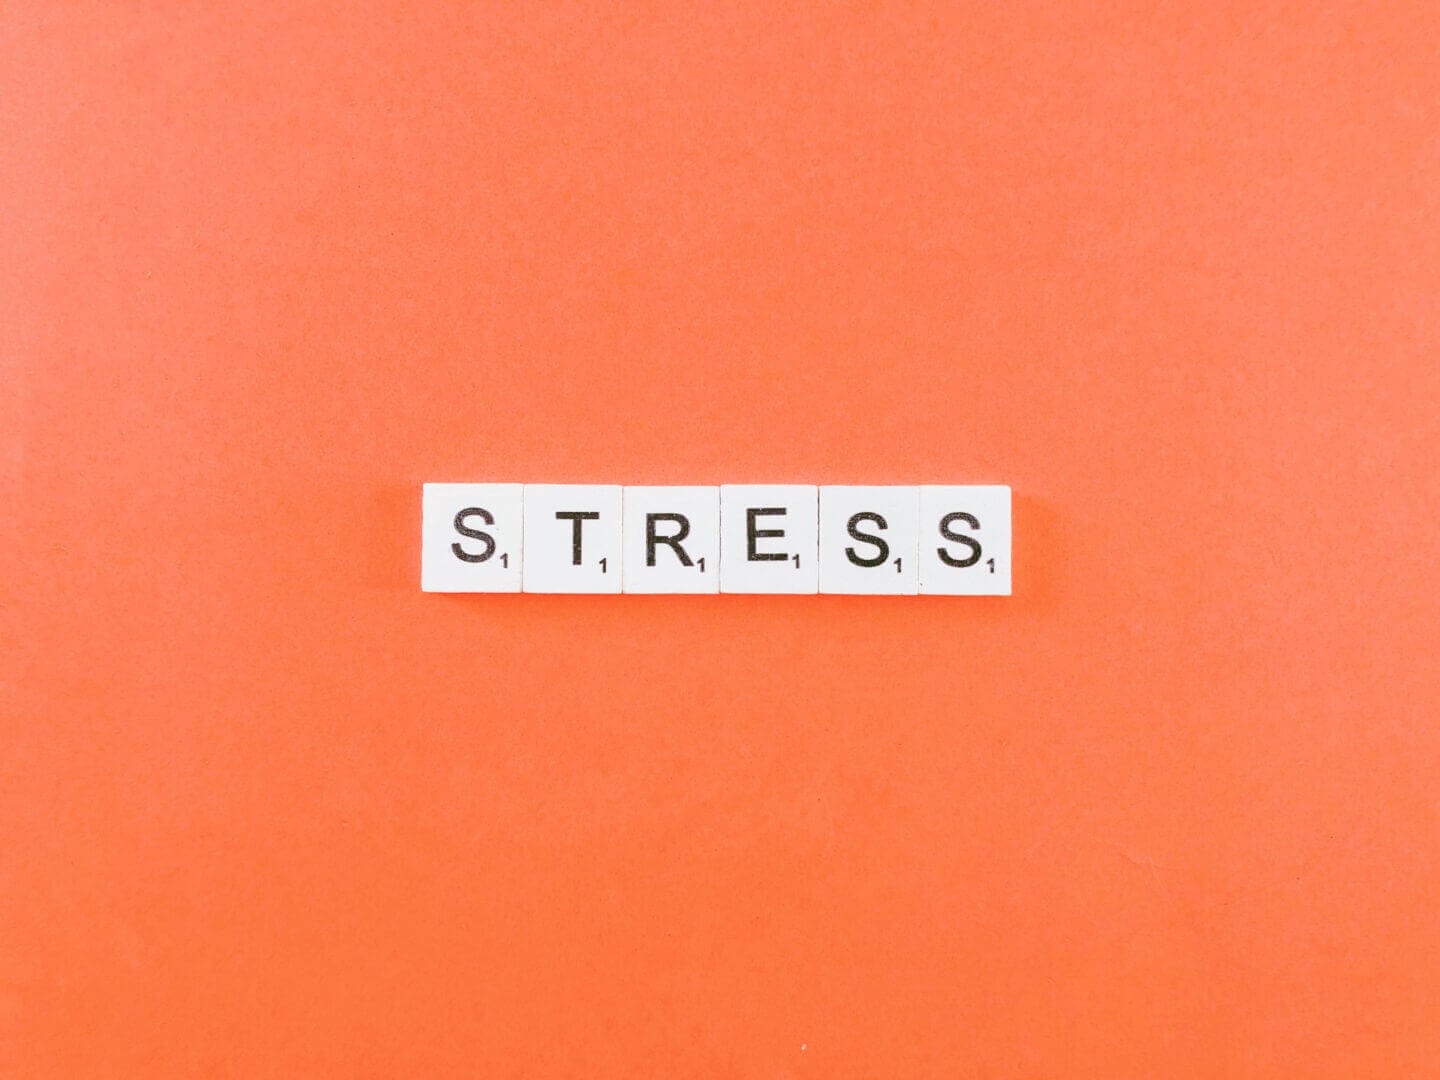 stress better with this Organizational Wellness Challenge